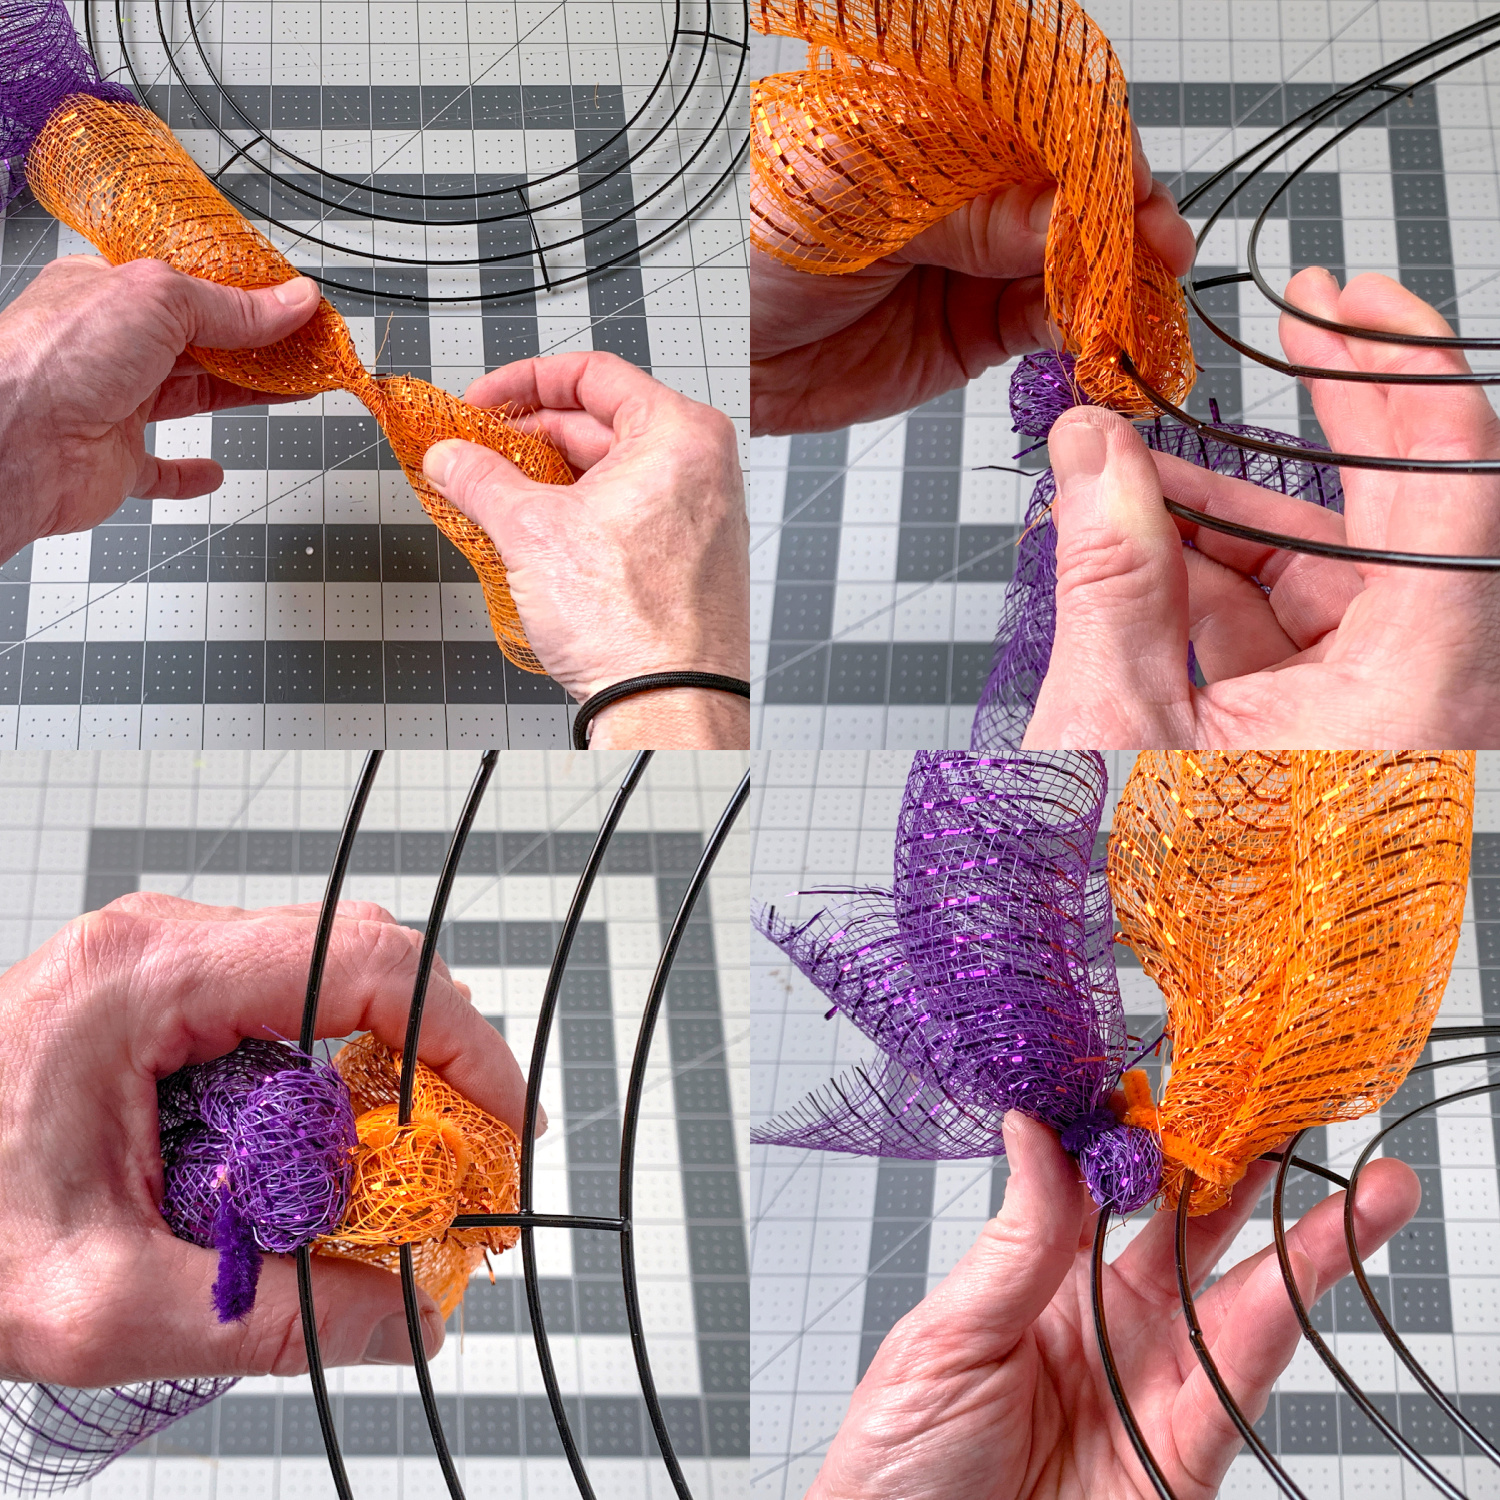 Wrapping purple and orange mesh around a wire wreath form